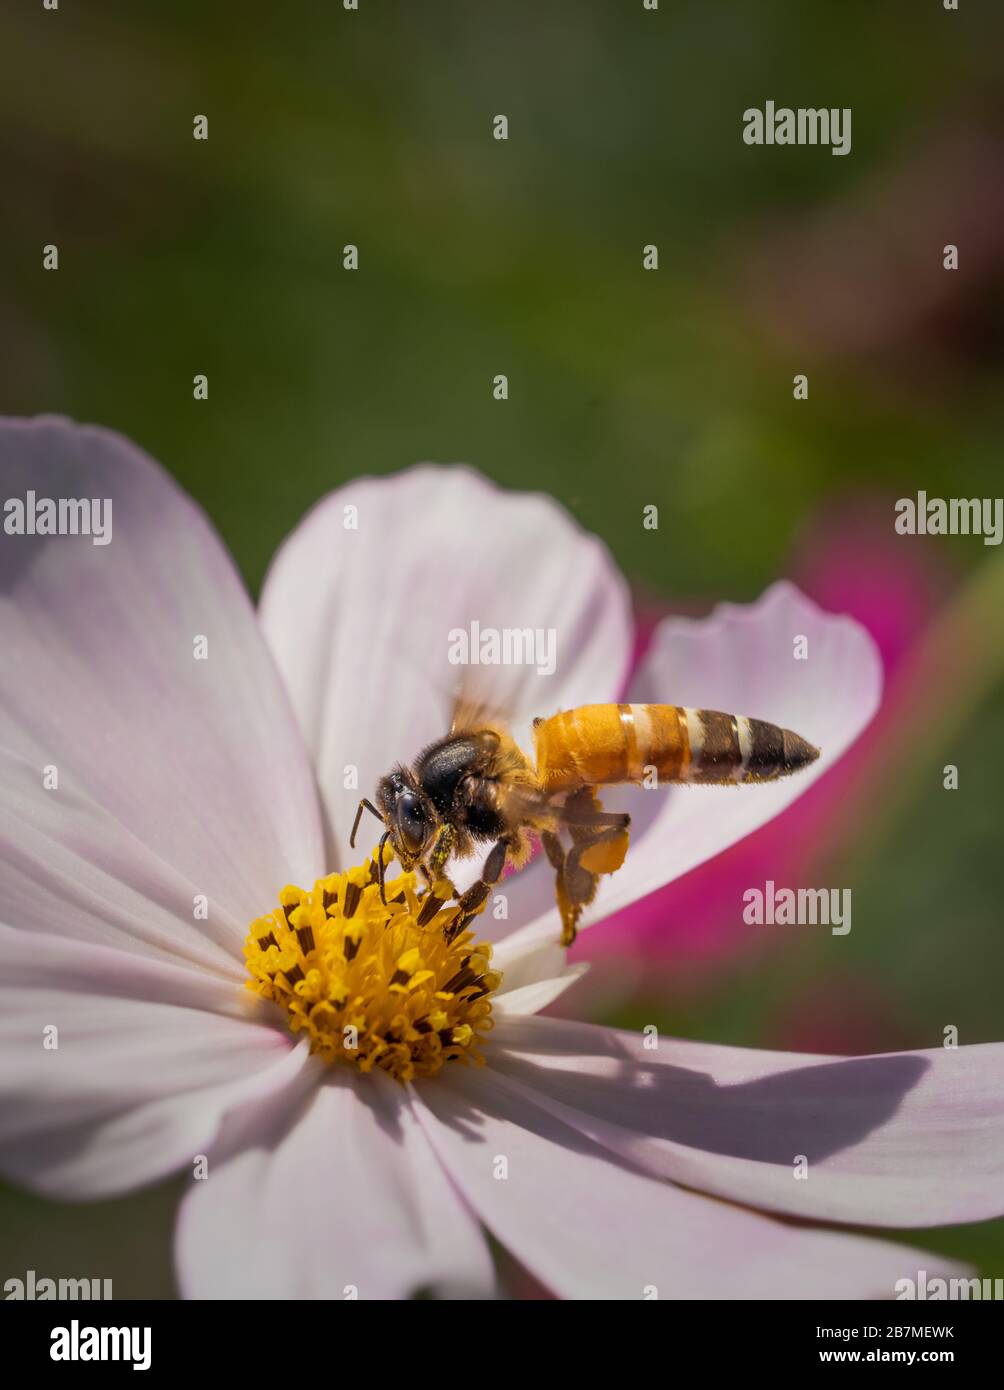 bee or honeybee sitting on a white daisy flower collecting nectar Stock Photo